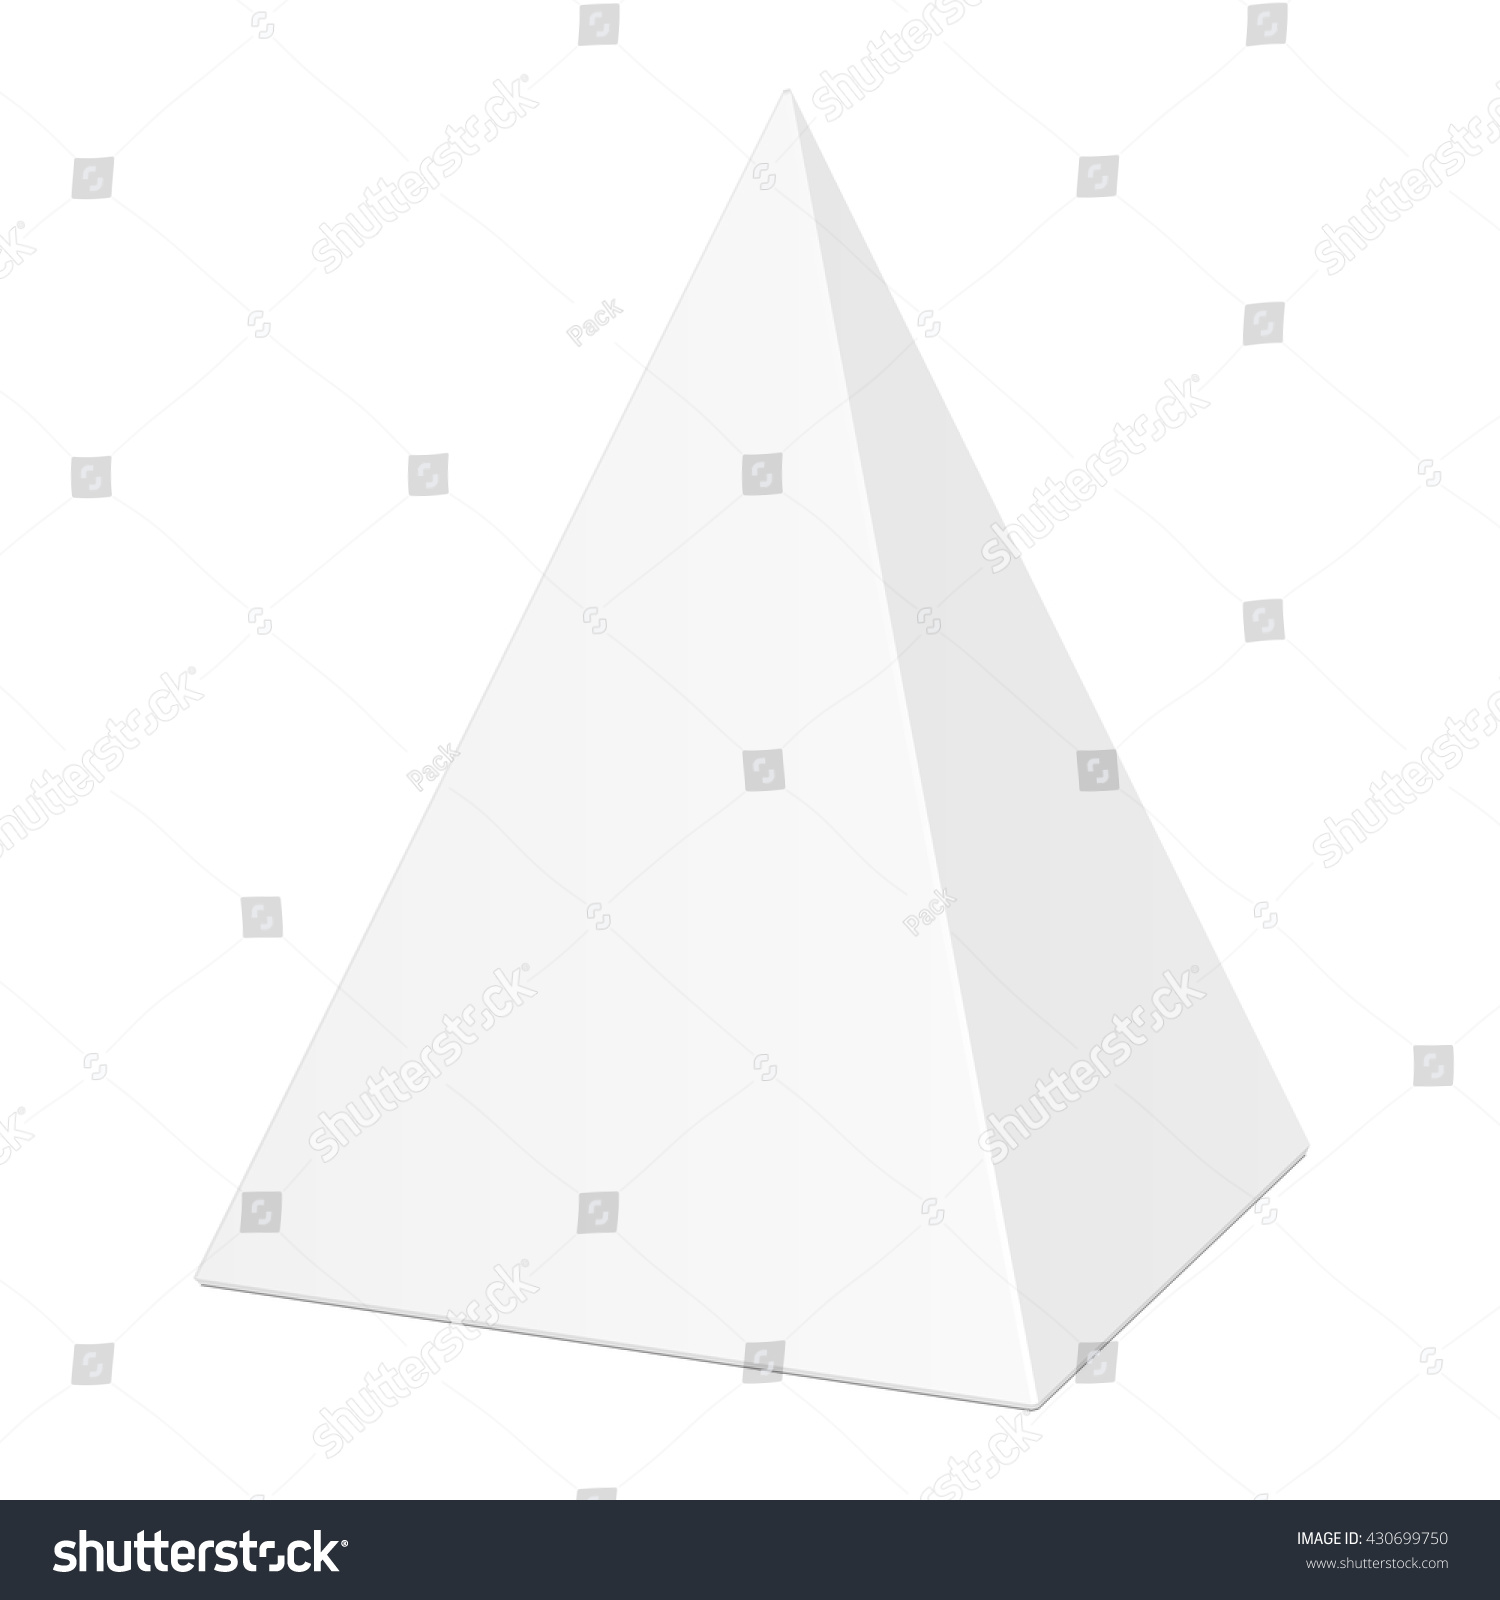 Download White Cardboard Pyramid Triangle Box Packaging Stock ...